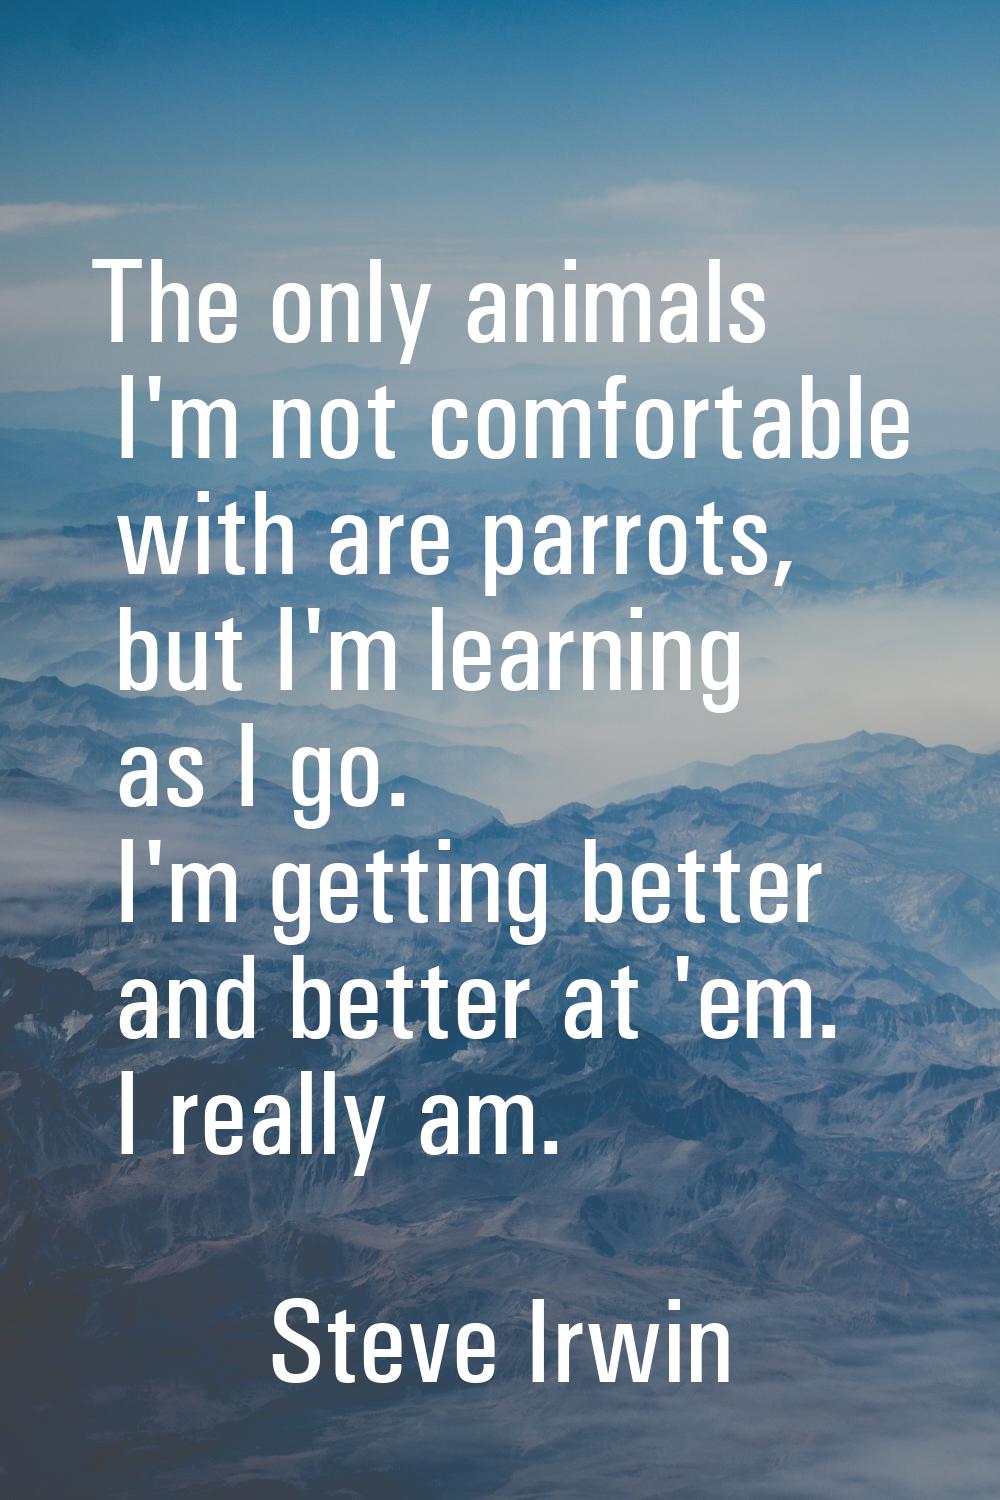 The only animals I'm not comfortable with are parrots, but I'm learning as I go. I'm getting better